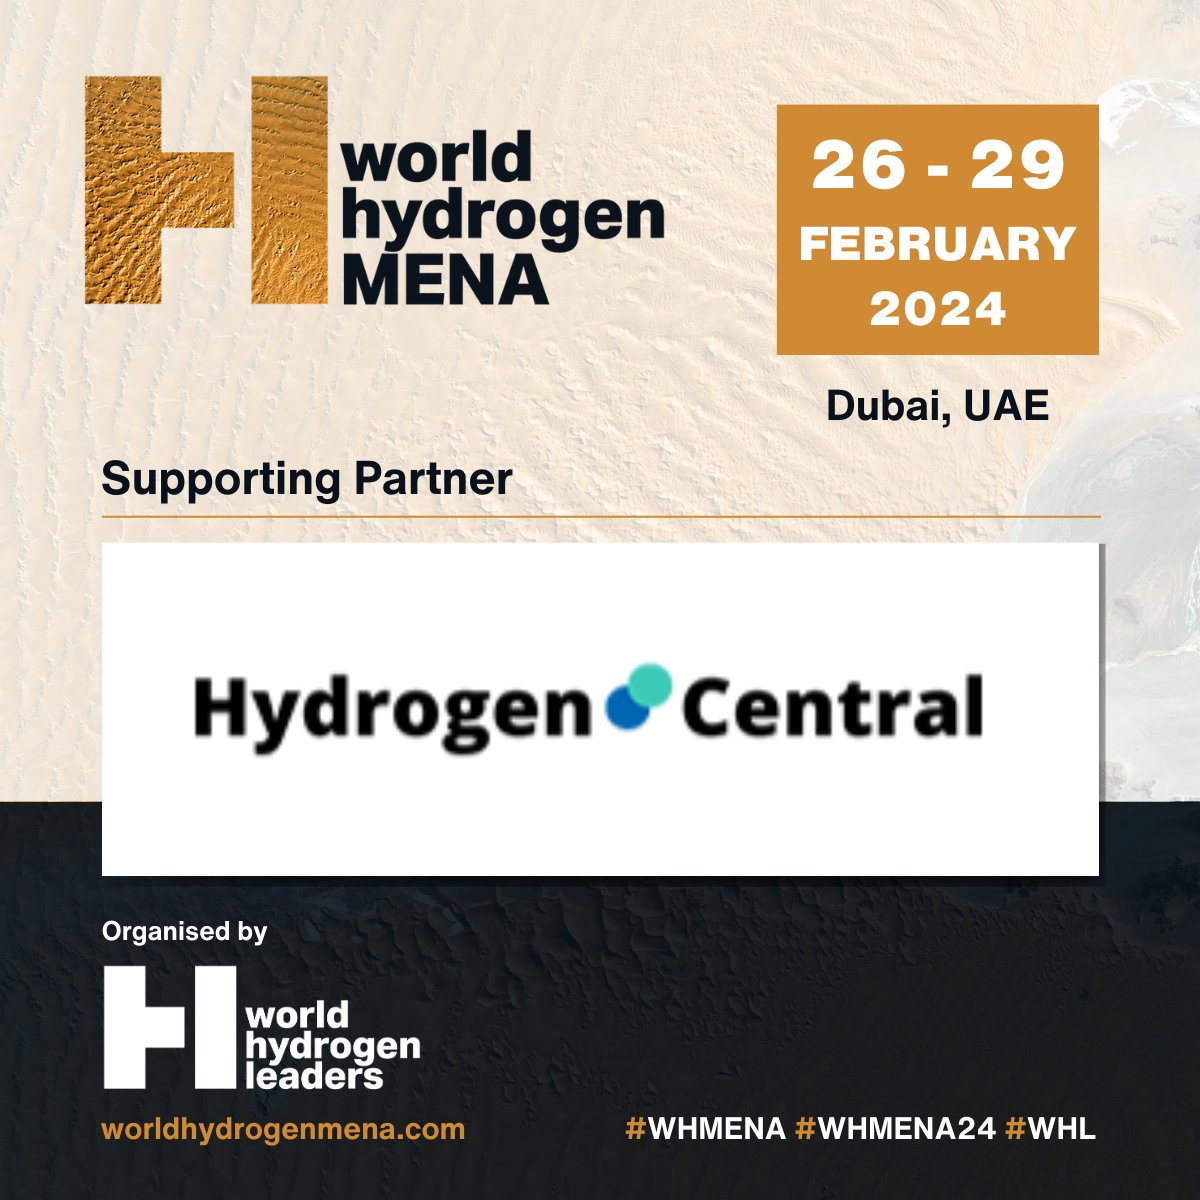 We are proud to partner with @hydrogenleaders for World Hydrogen MENA! Join 500+ hydrogen professionals in Dubai from 26-29 Feb 2024! Download the brochure for the agenda, floorplan, speaker lineup and more: info.greenpowerglobal.com/whmena-brochur…